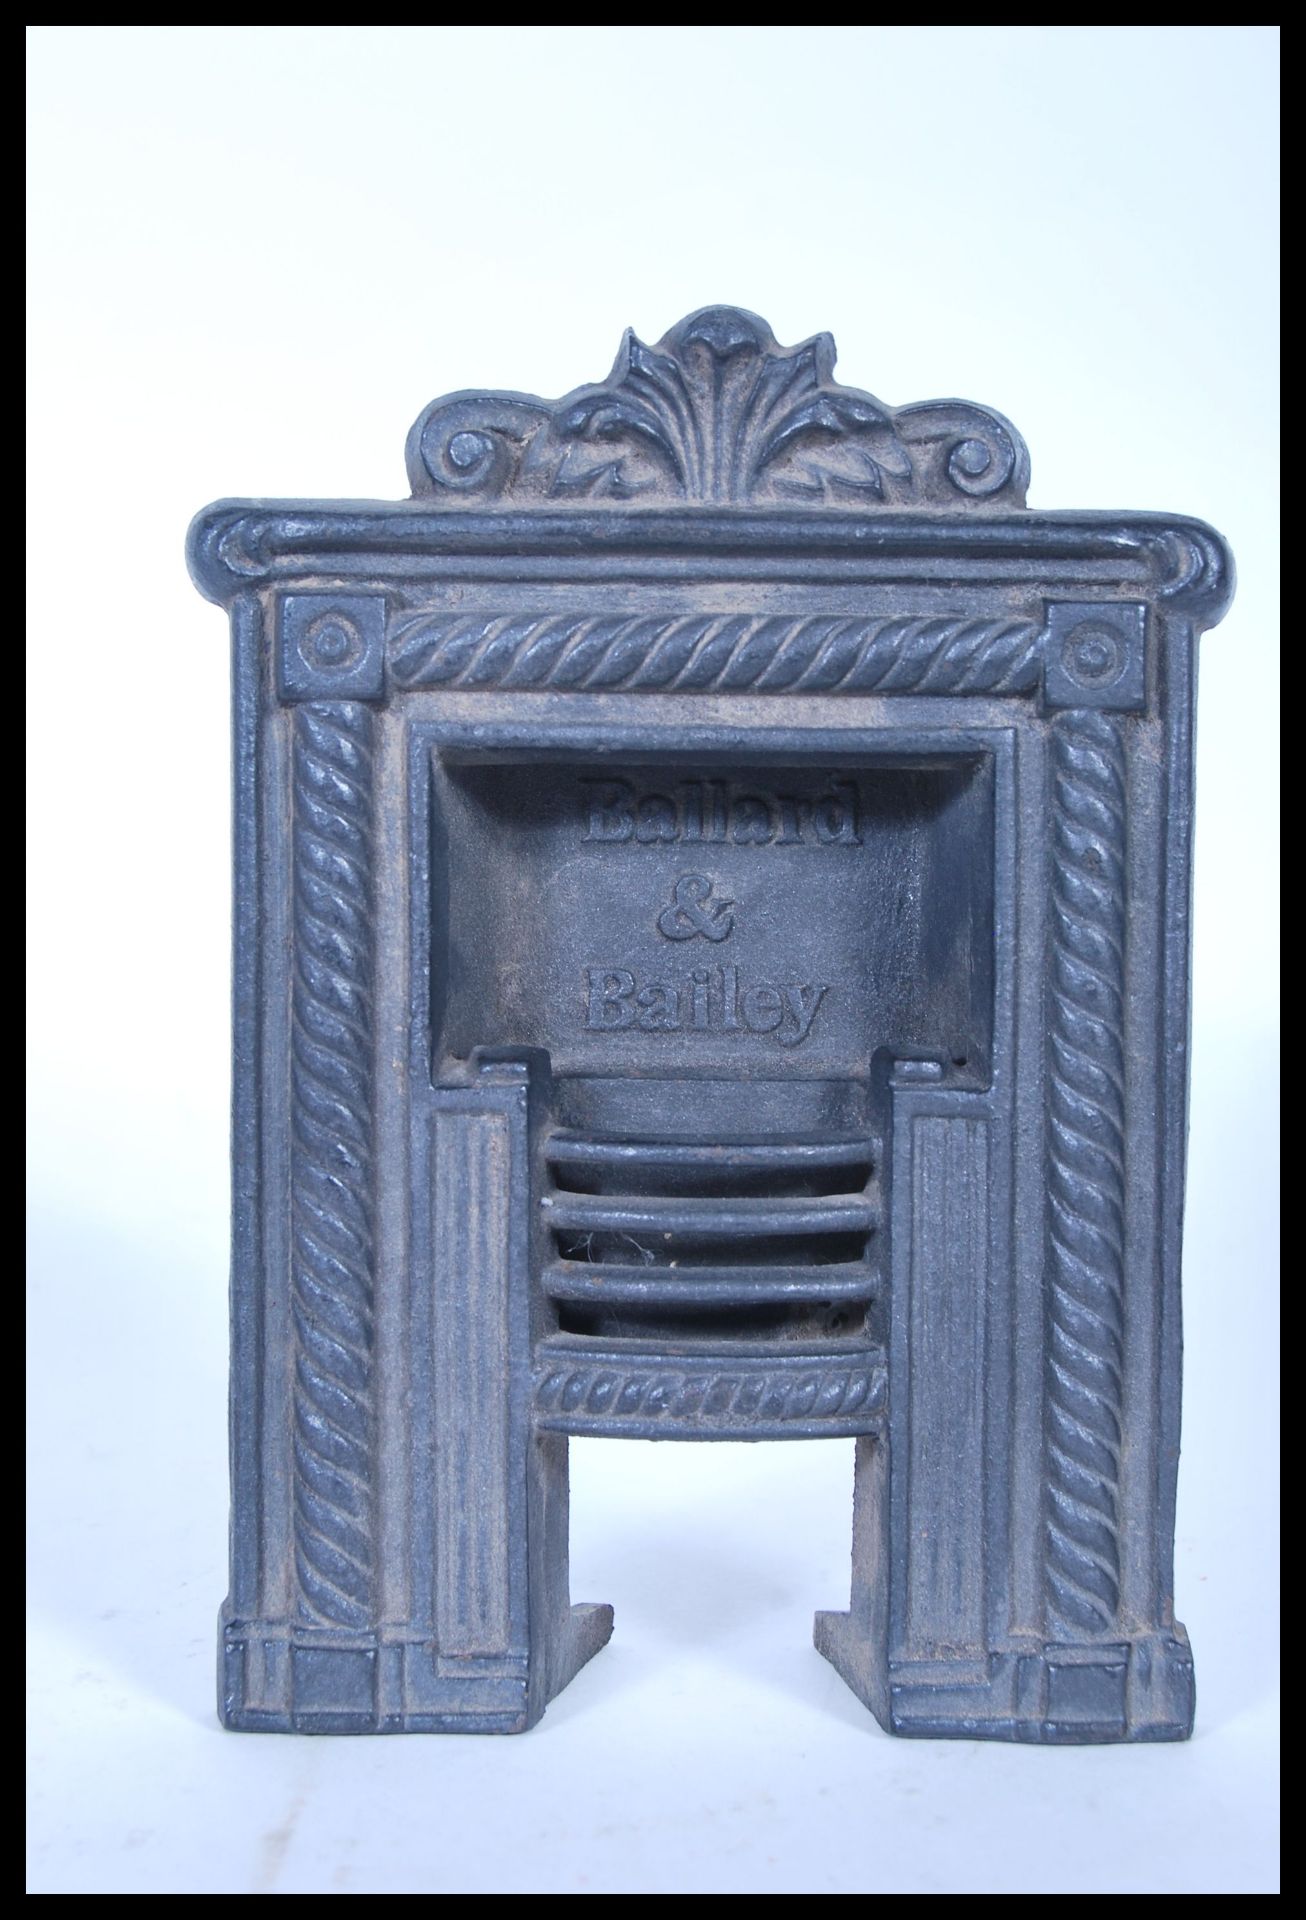 An early 20th Century salesman advertising example of a miniature cast iron fire surround by Ballard